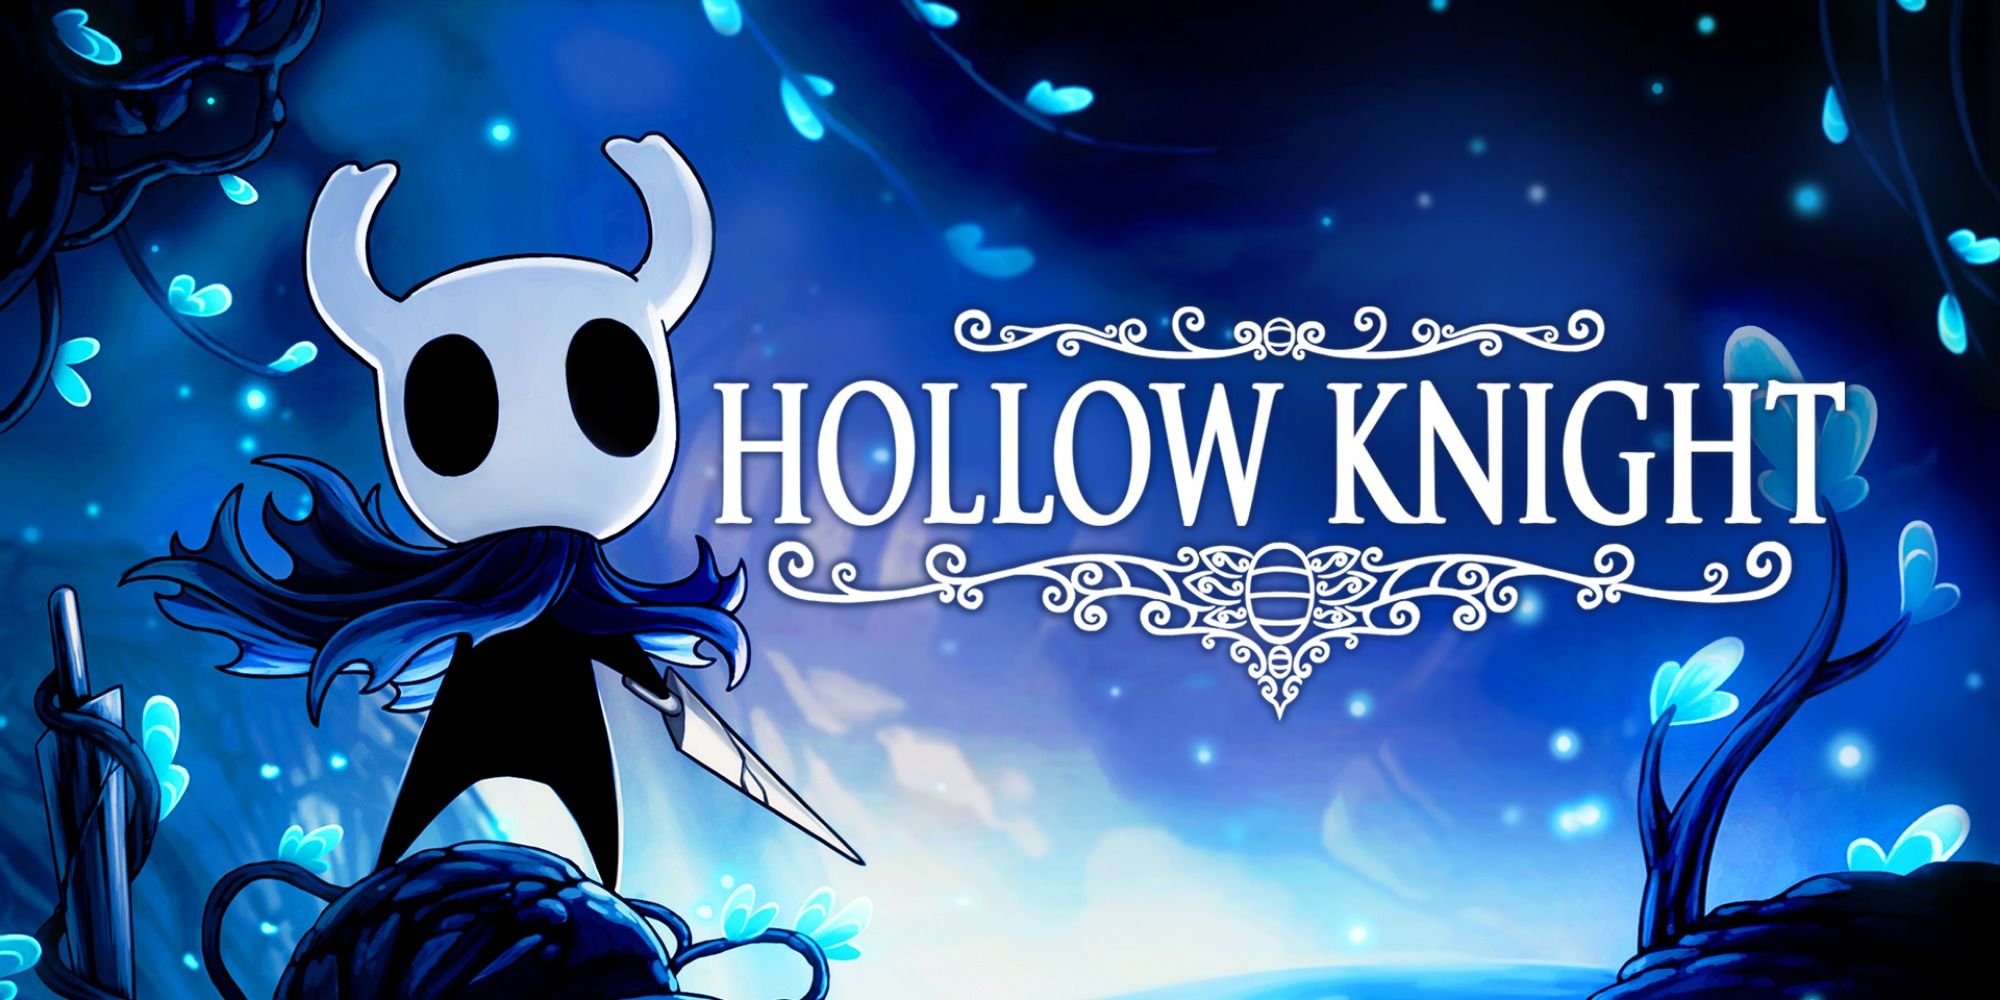 Hollow Knight: The Knight In A Blue Cave With The Logo